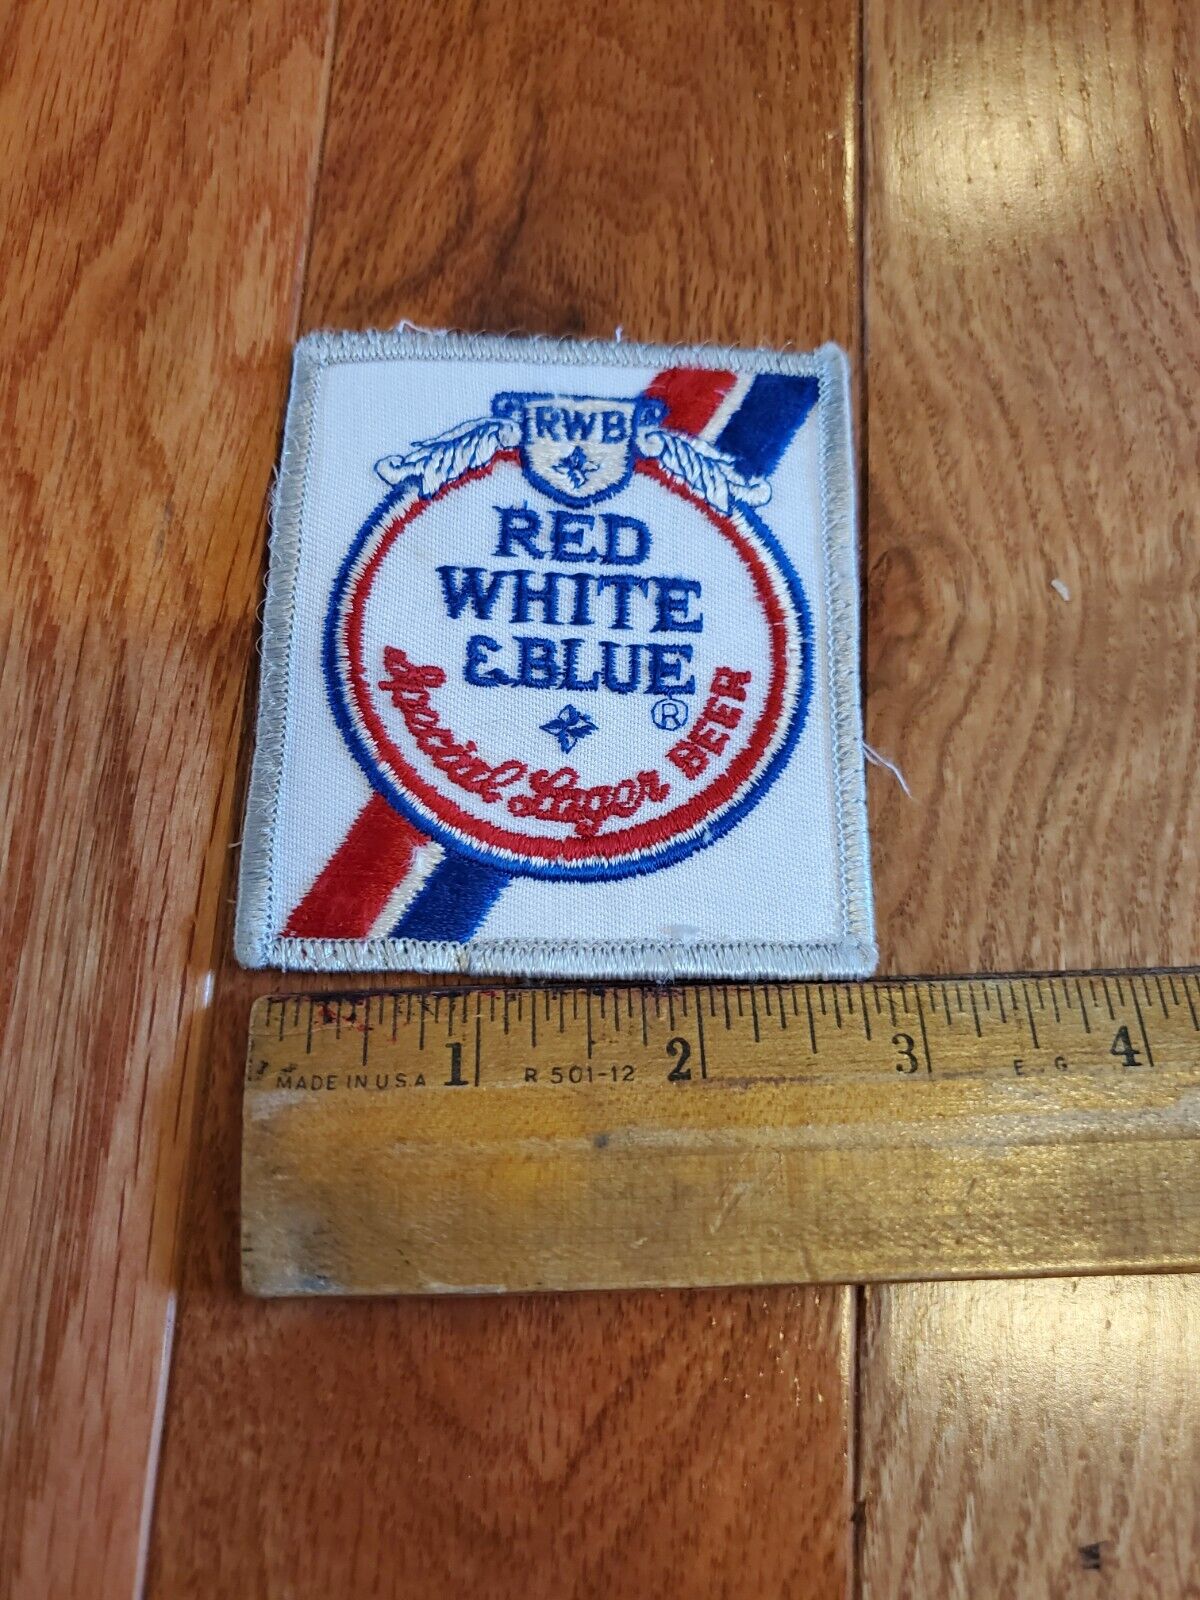 Red White And Blue Lauger Beer 3 Inch Patch